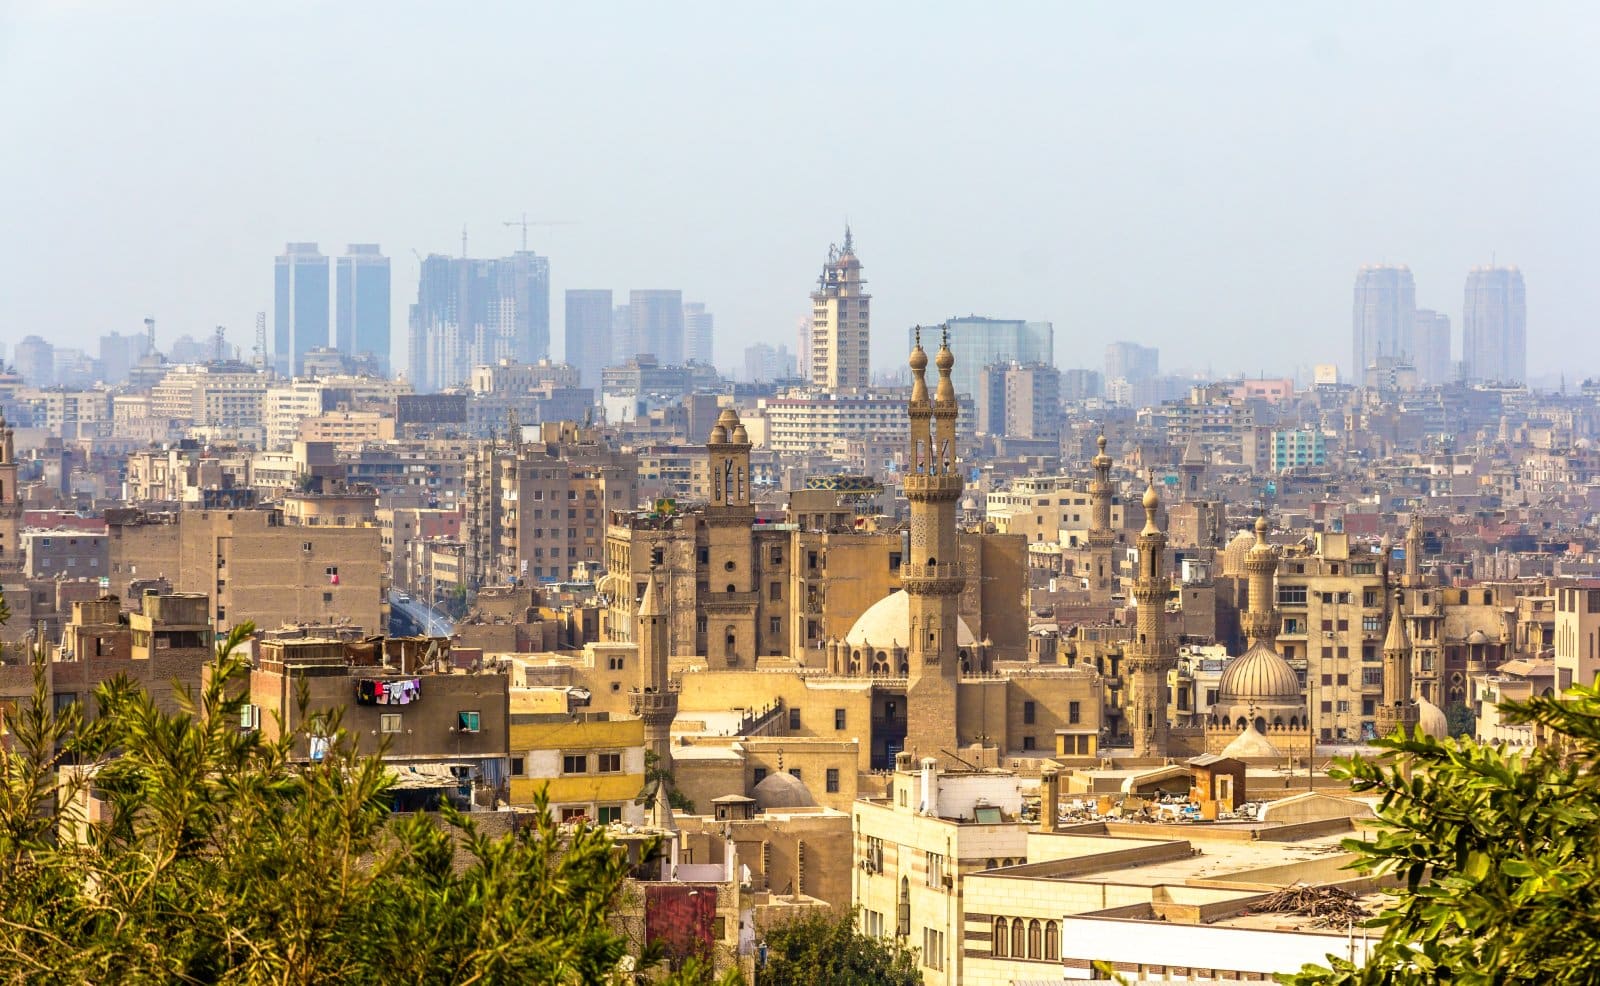 <p class="wp-caption-text">Image Credit: Shutterstock / Leonid Andronov</p>  <p><span>Islamic Cairo, designated a UNESCO World Heritage site, is not merely a district but the historical and spiritual heart of the city. This area boasts a dense concentration of medieval architectural treasures, including mosques, madrasas, hammams, and fountains dating back to the Fatimid, Ayyubid, and Mamluk periods. Highlights include the Al-Azhar Mosque, one of the oldest universities in the world, and the Sultan Hassan Mosque, a masterpiece of Mamluk architecture. Islamic Cairo is a living museum where visitors can explore the narrow lanes, discover hidden courtyards, and experience the daily rhythms of life in a neighborhood that has been continuously inhabited for centuries.</span> </p>